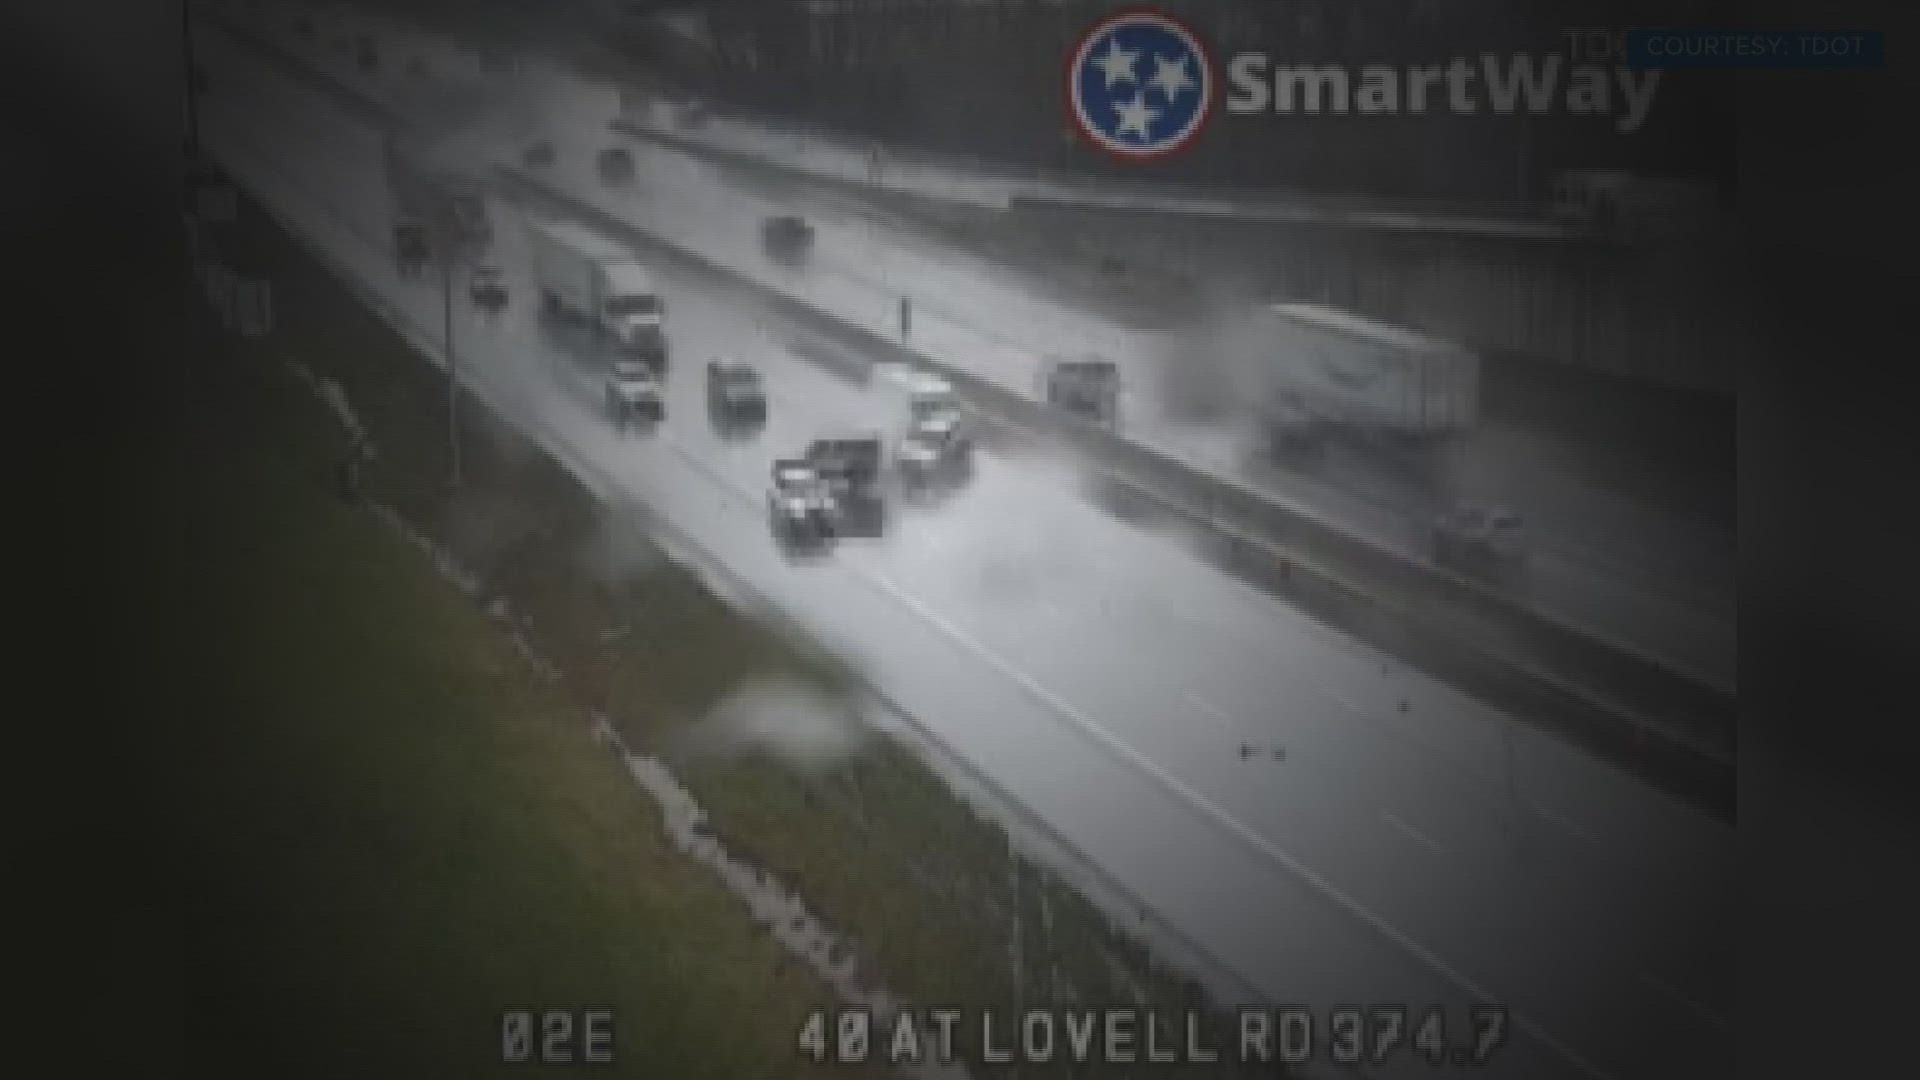 TDOT said it is keeping an eye on a spot along I-40, near Lovell Road where water tends to puddle.